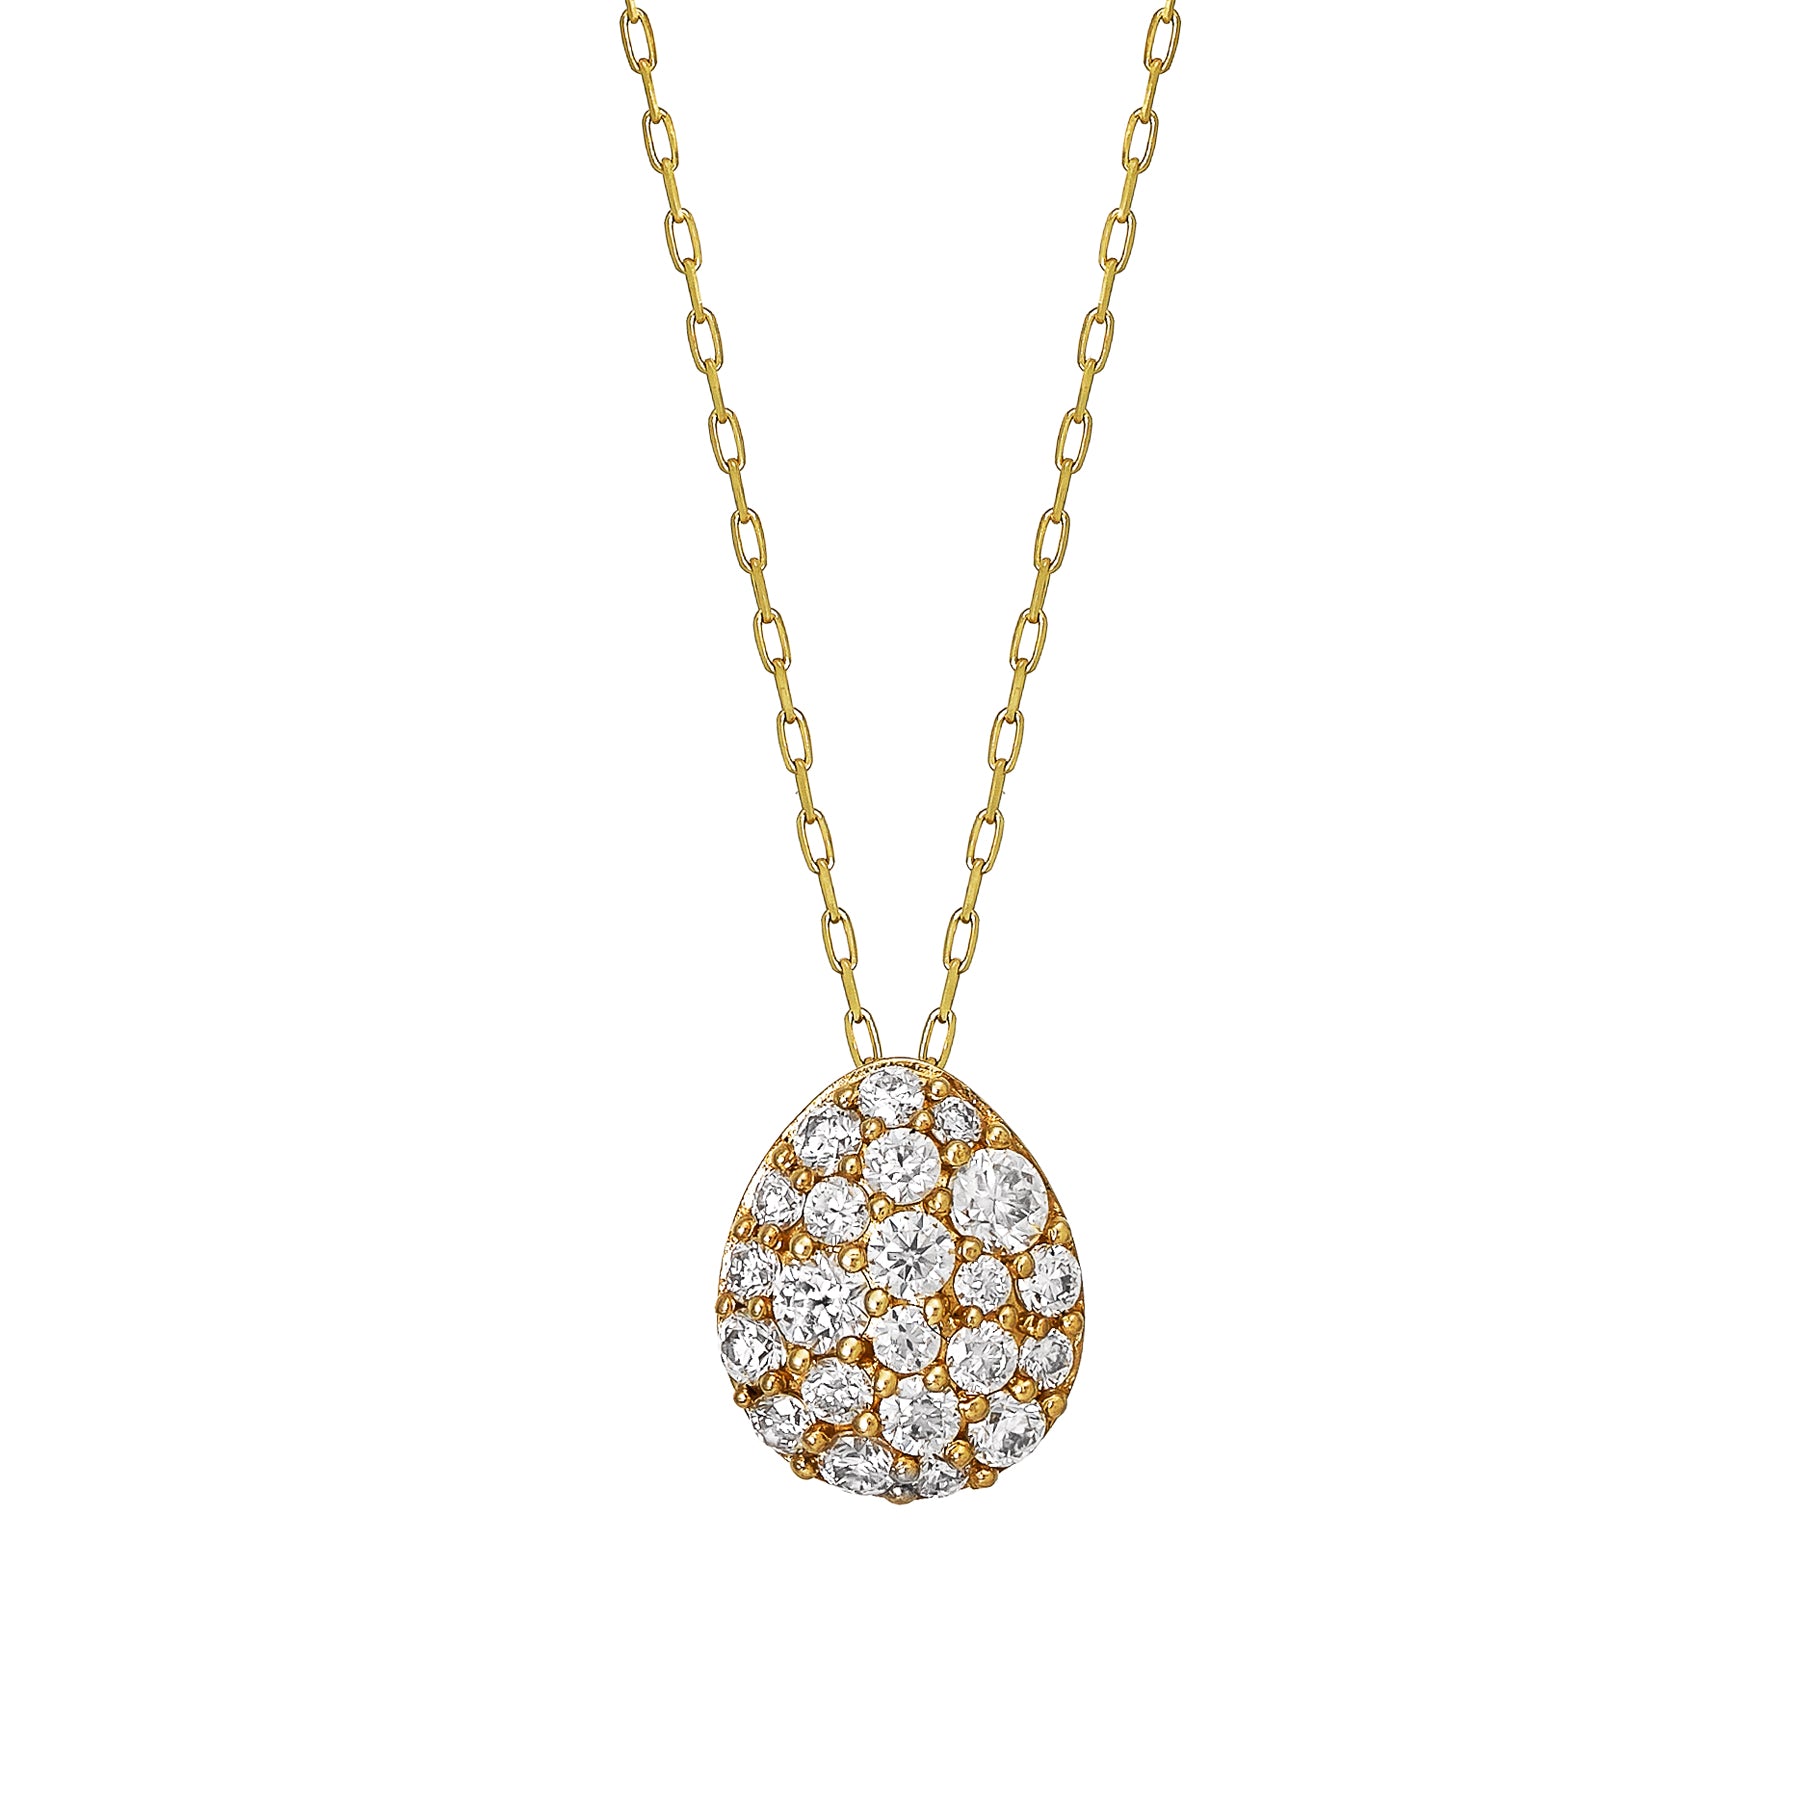 10K Moissanite Egg Necklace (Yellow Gold) - Product Image